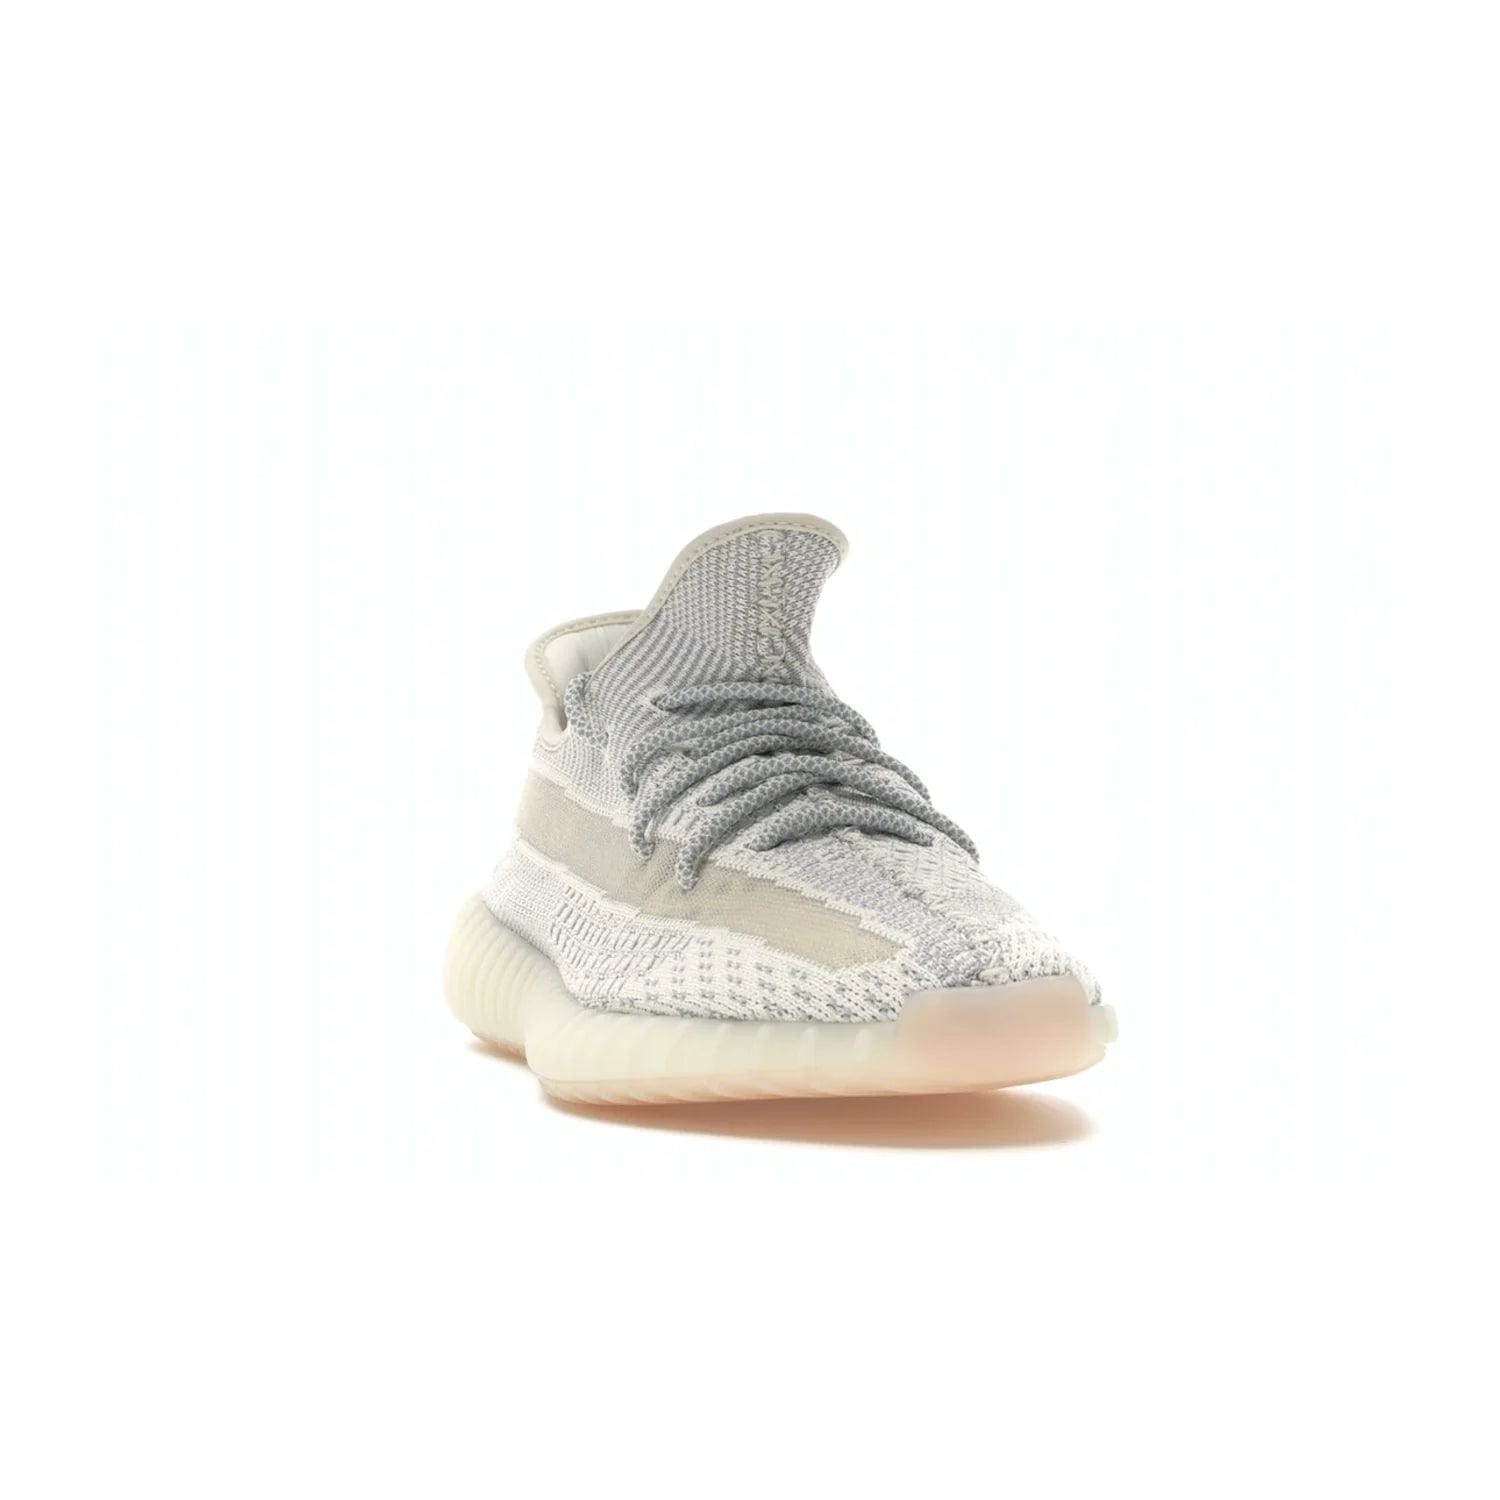 adidas Yeezy Boost 350 V2 Lundmark (Non Reflective) - Image 8 - Only at www.BallersClubKickz.com - Shop the exclusive adidas Yeezy Boost 350 V2 Lundmark with a subtle summer color, mesh upper, white-to-cream transitional midsole, light tan outsole, and pink middle stripe. Comfort and style come together in this perfect summer 350 V2. Released on July 11, 2019.